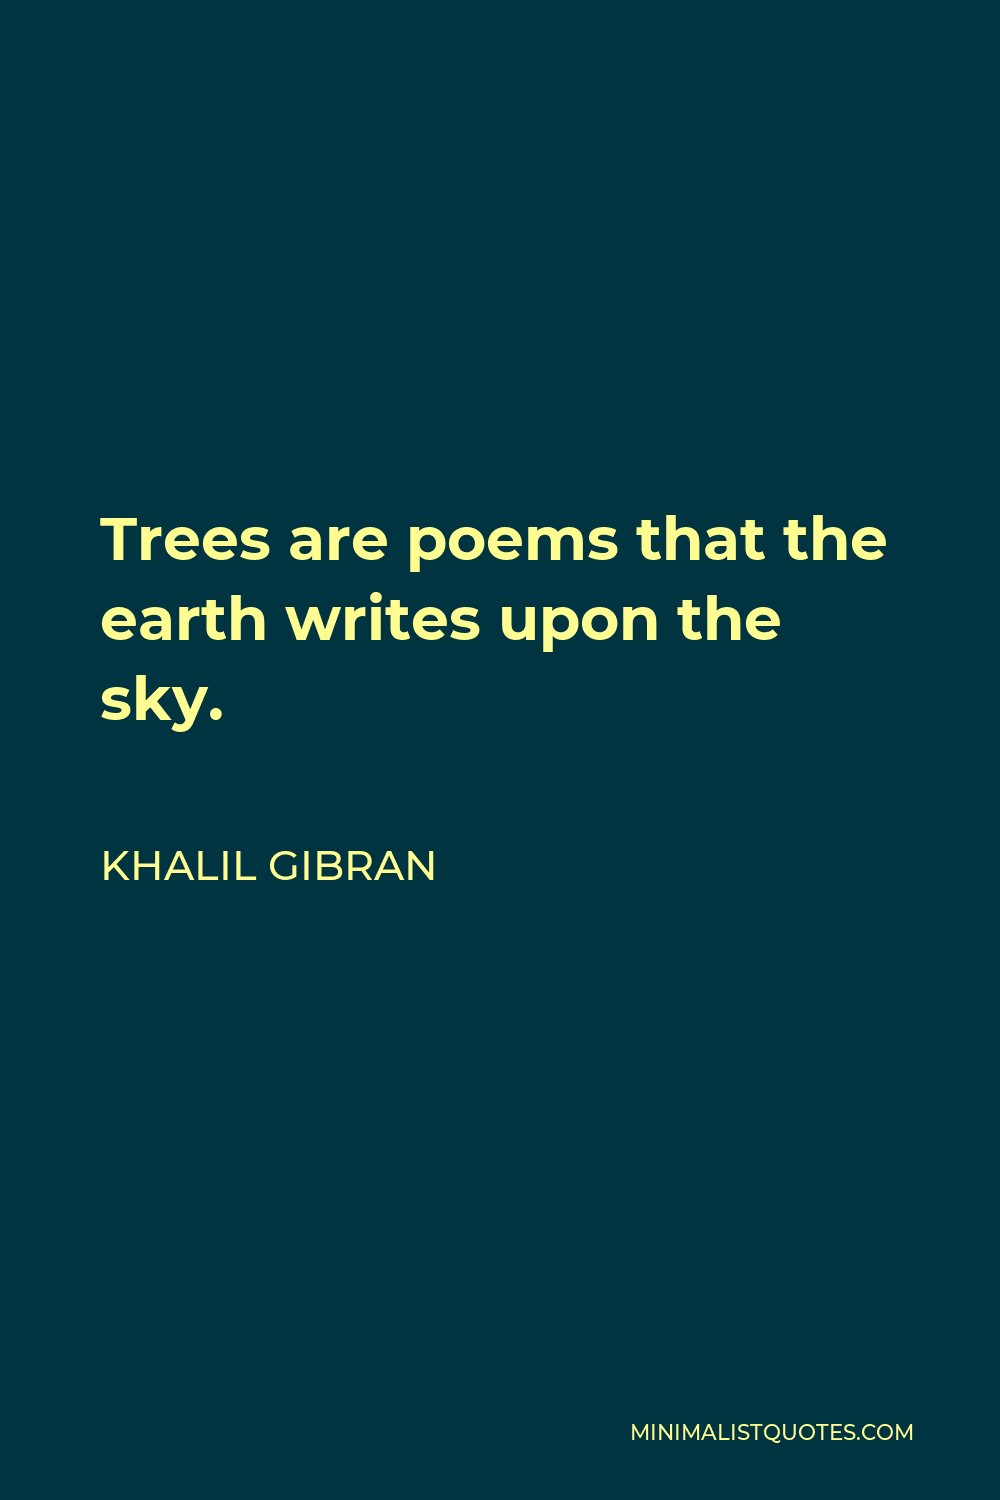 Khalil Gibran Quote - Trees are poems that the earth writes upon the sky.